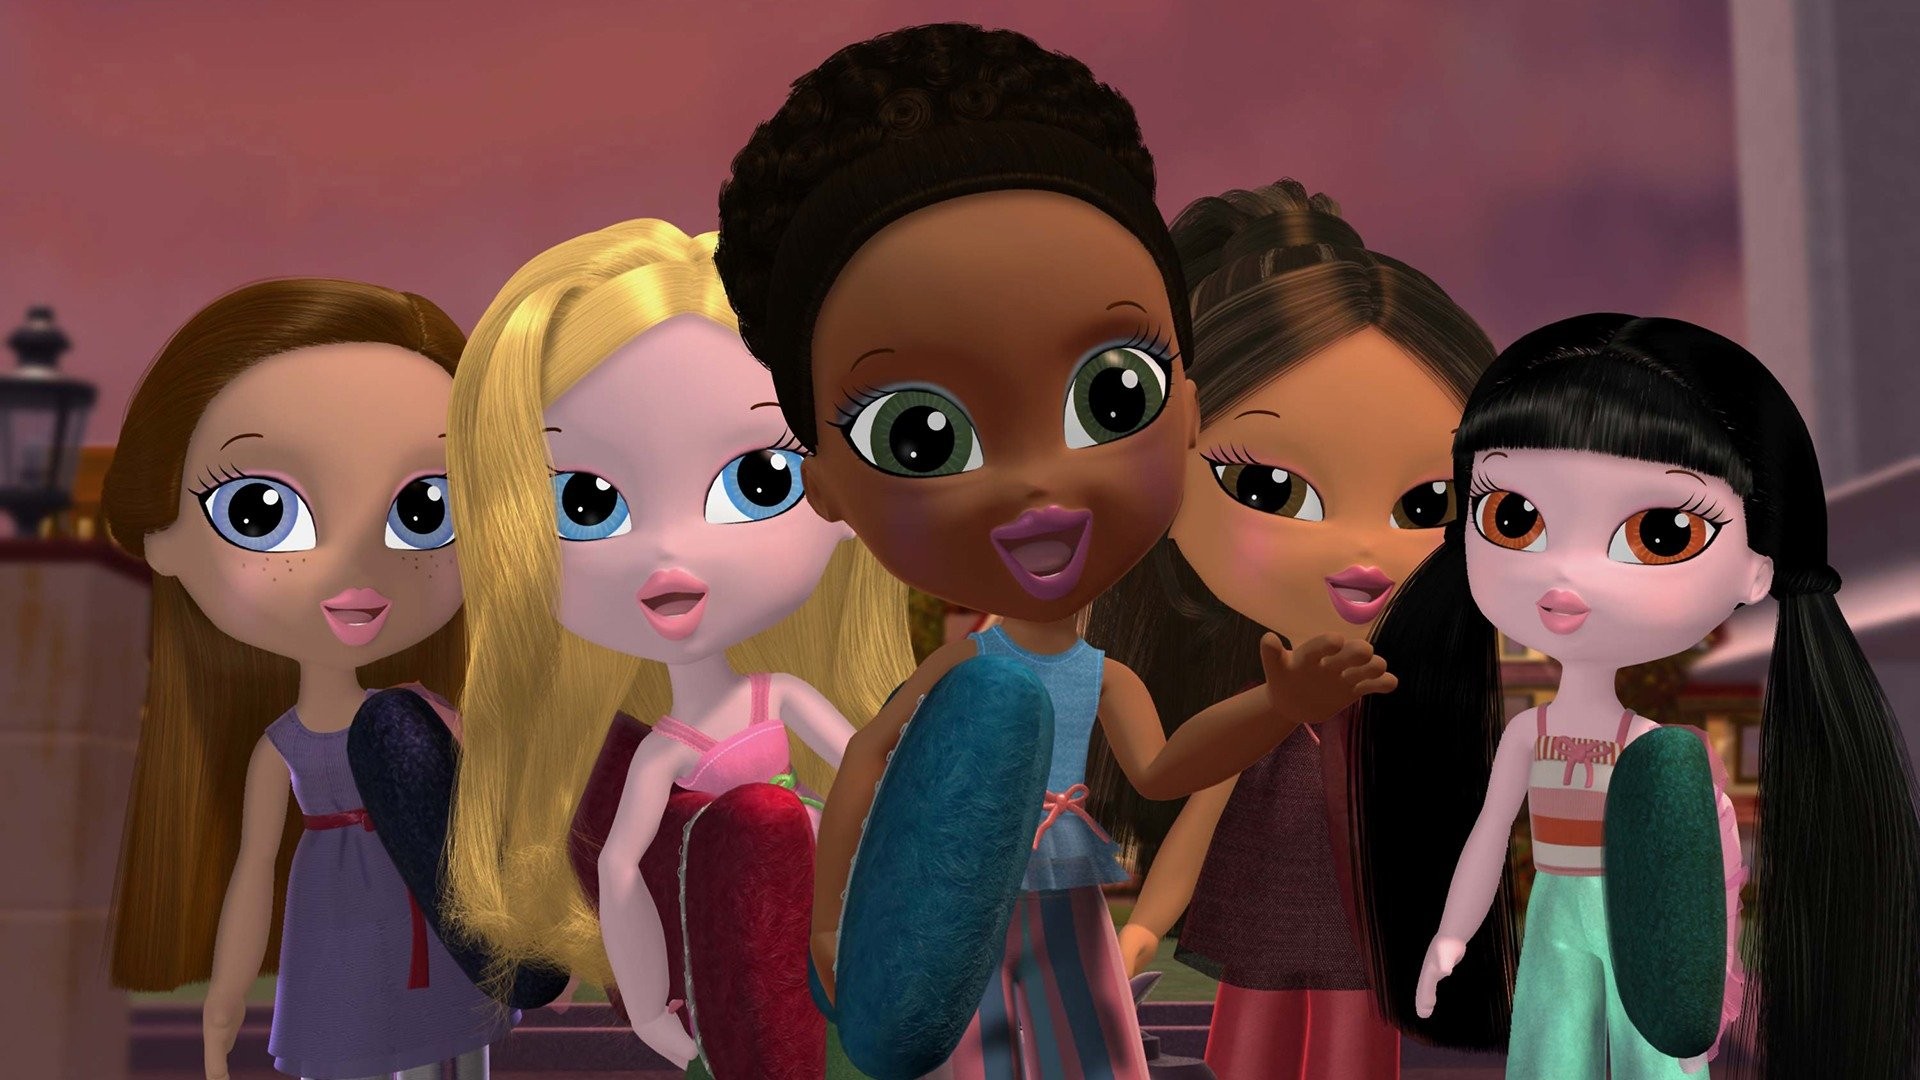 Happy Bratz Month! 🎂 Tonight, on a very special episode of *BRATZ SLUMBER  PARTEA*, we are sharing some of our fave fan content from ou